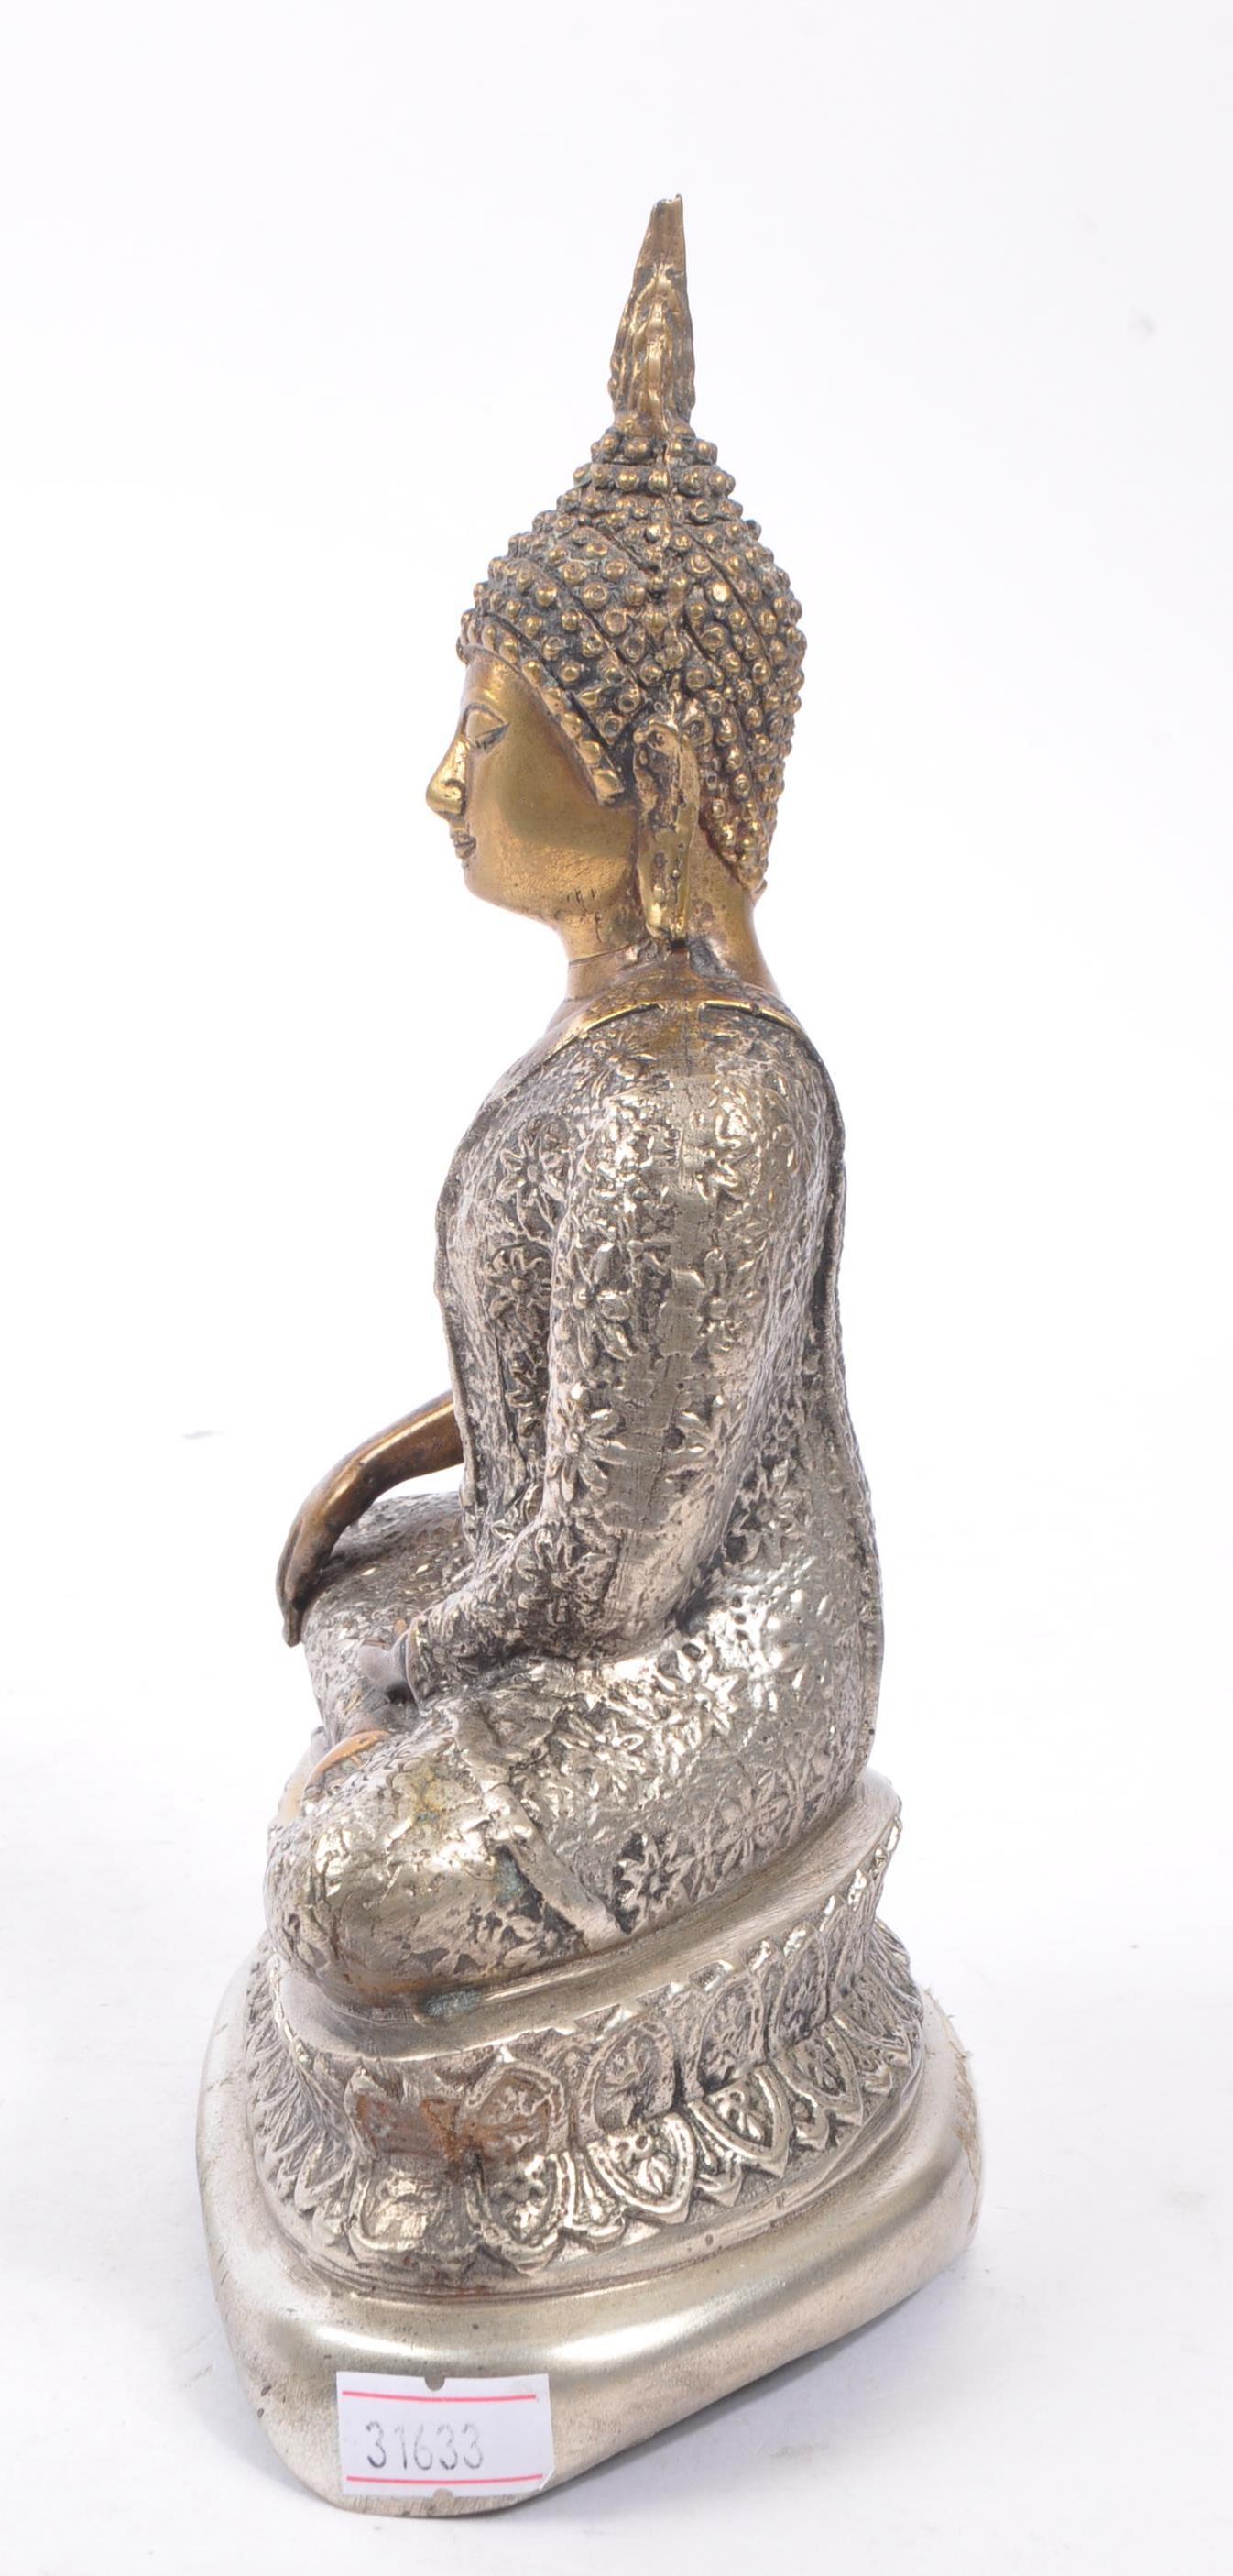 PAINTED GOLD AND SILVER BRONZE BUDDHA FIGURE - Image 4 of 7